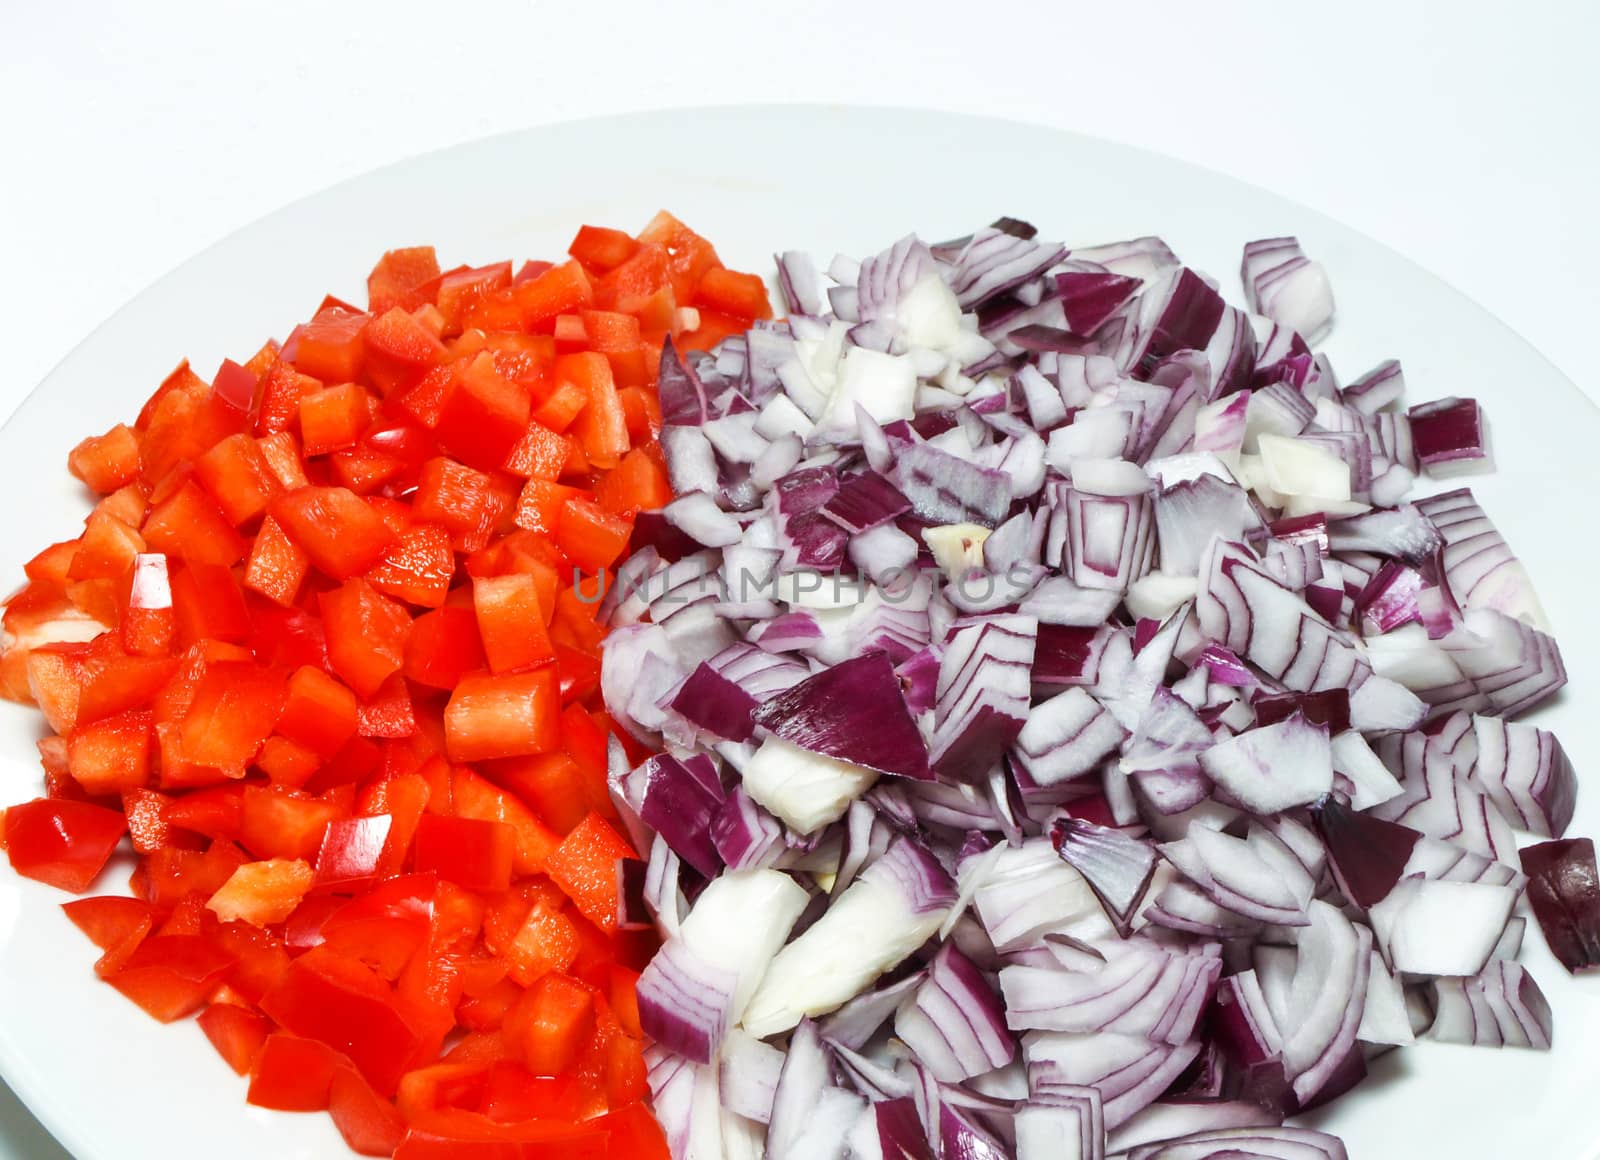 Red onion and pepper by Arvebettum